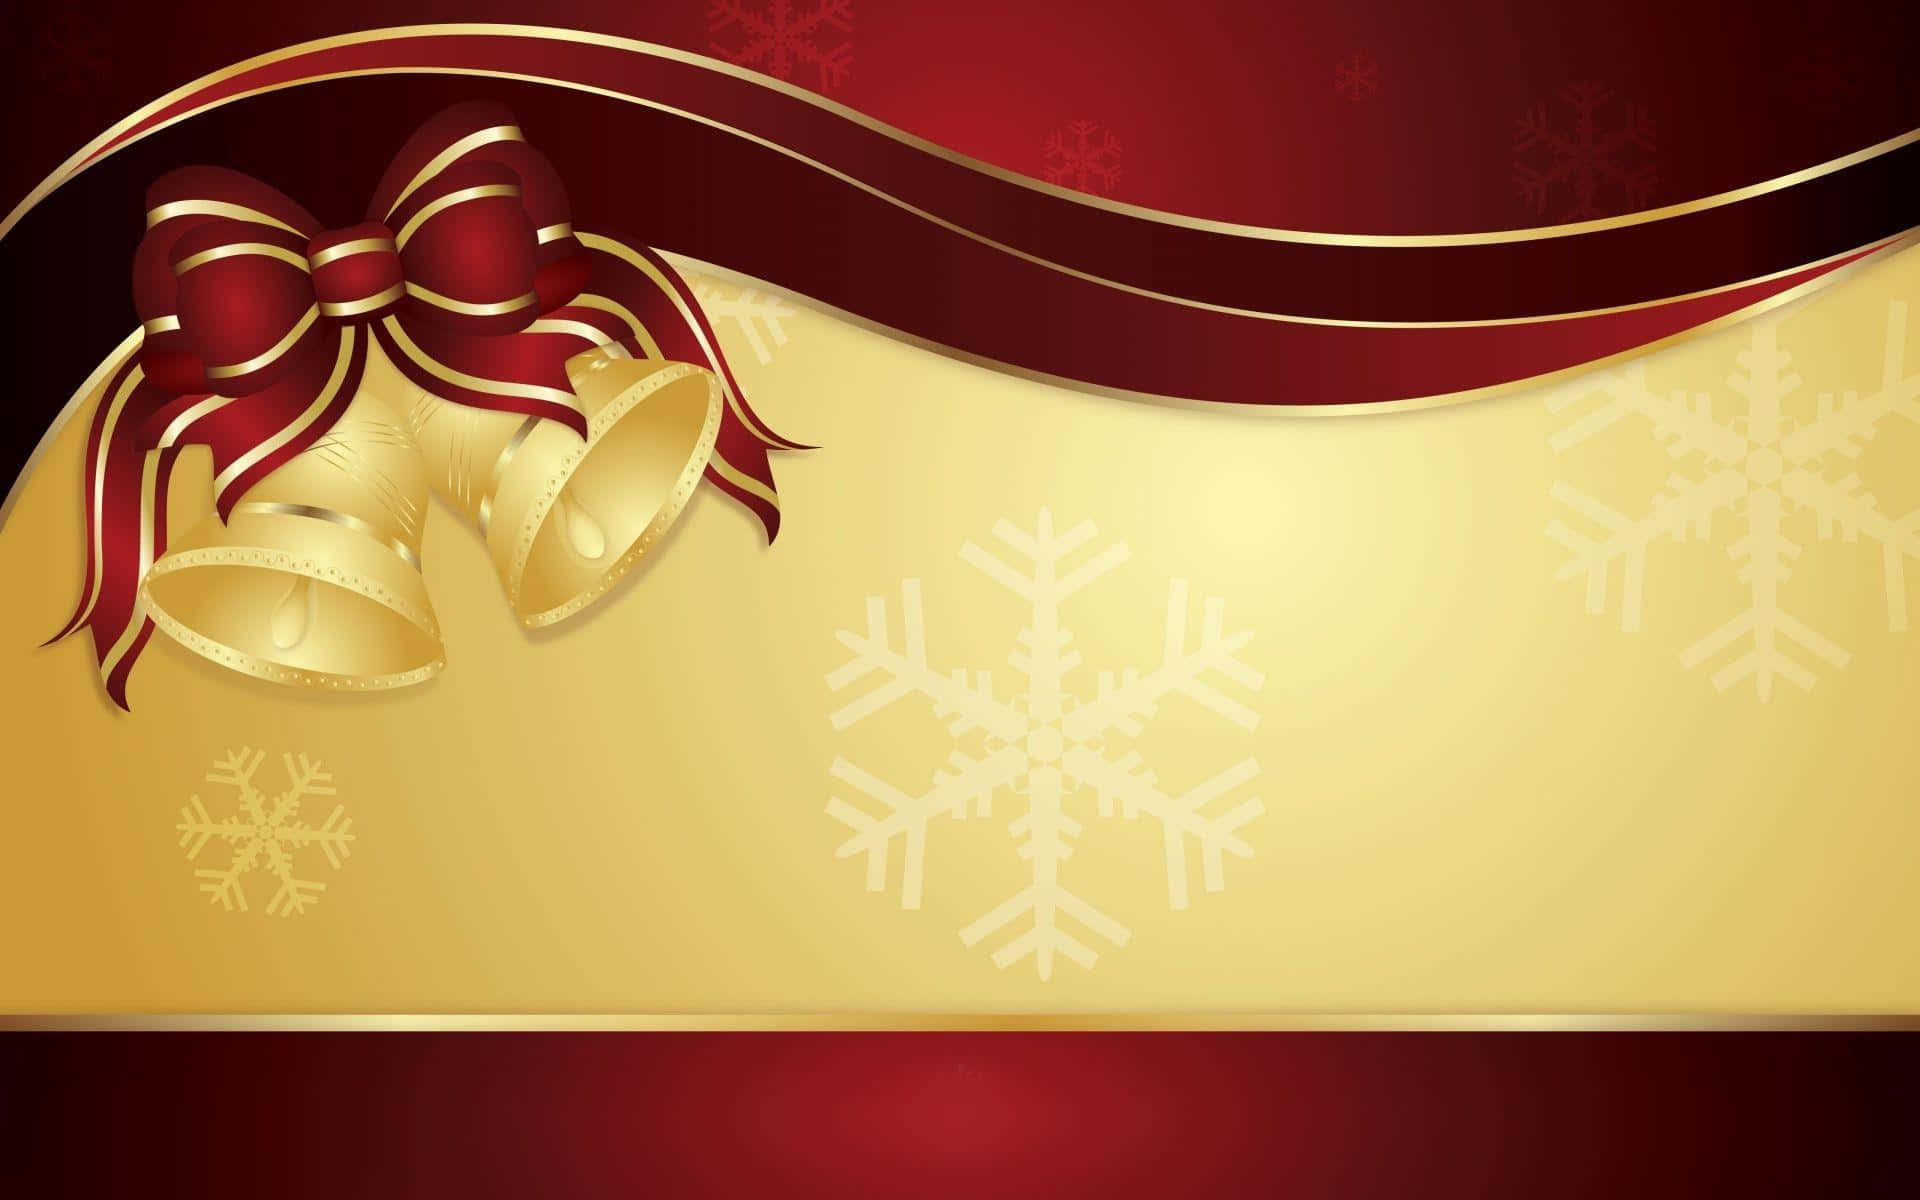 Send holiday cheer around the world with this festive Christmas card background